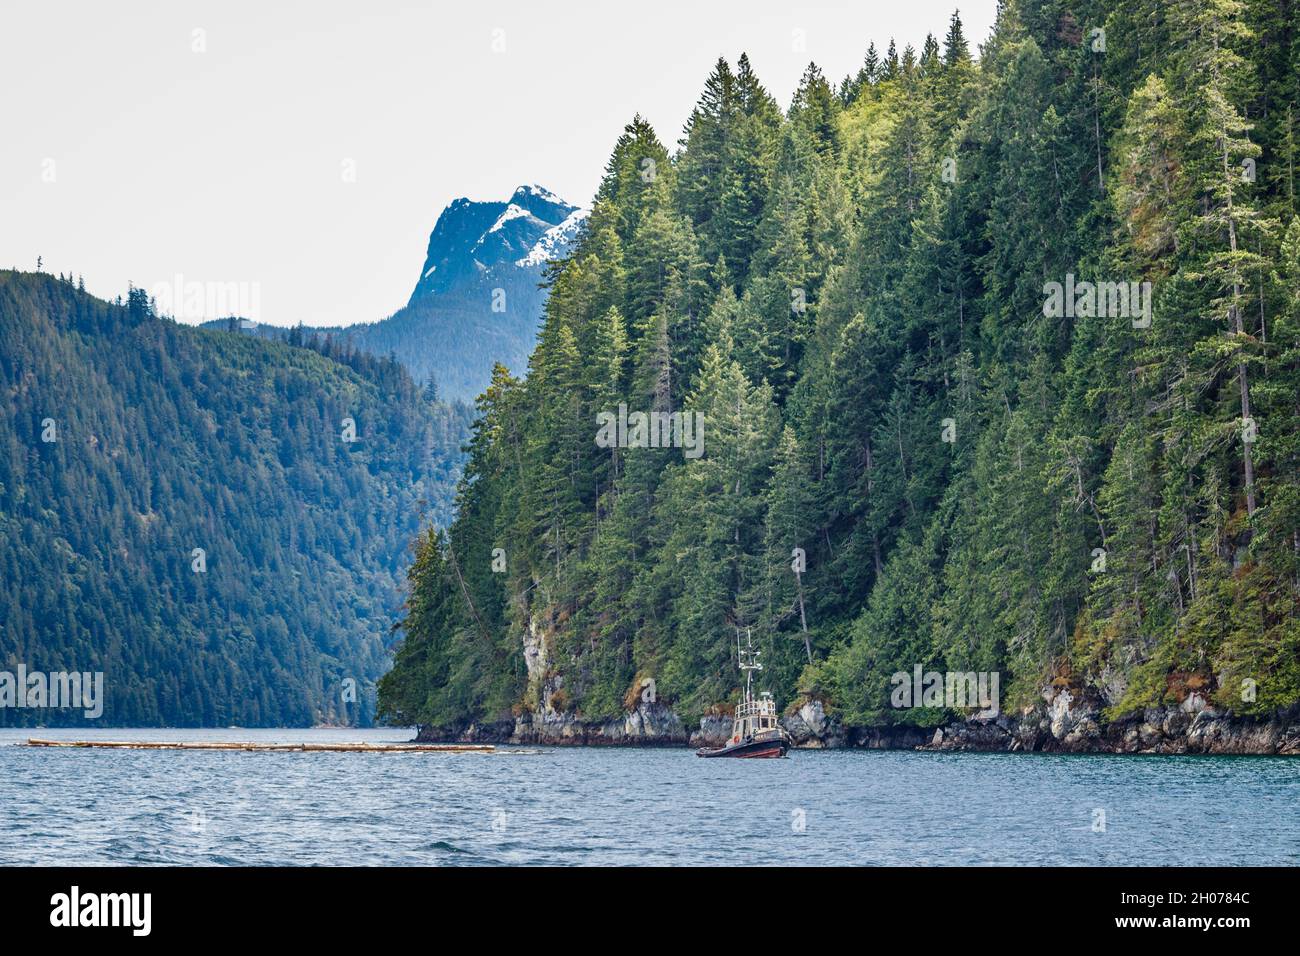 A tugboat tows a log boom alongside a forested shore in a narrow coastal passage, with a steep, snow topped peak in the background (British Columbia). Stock Photo